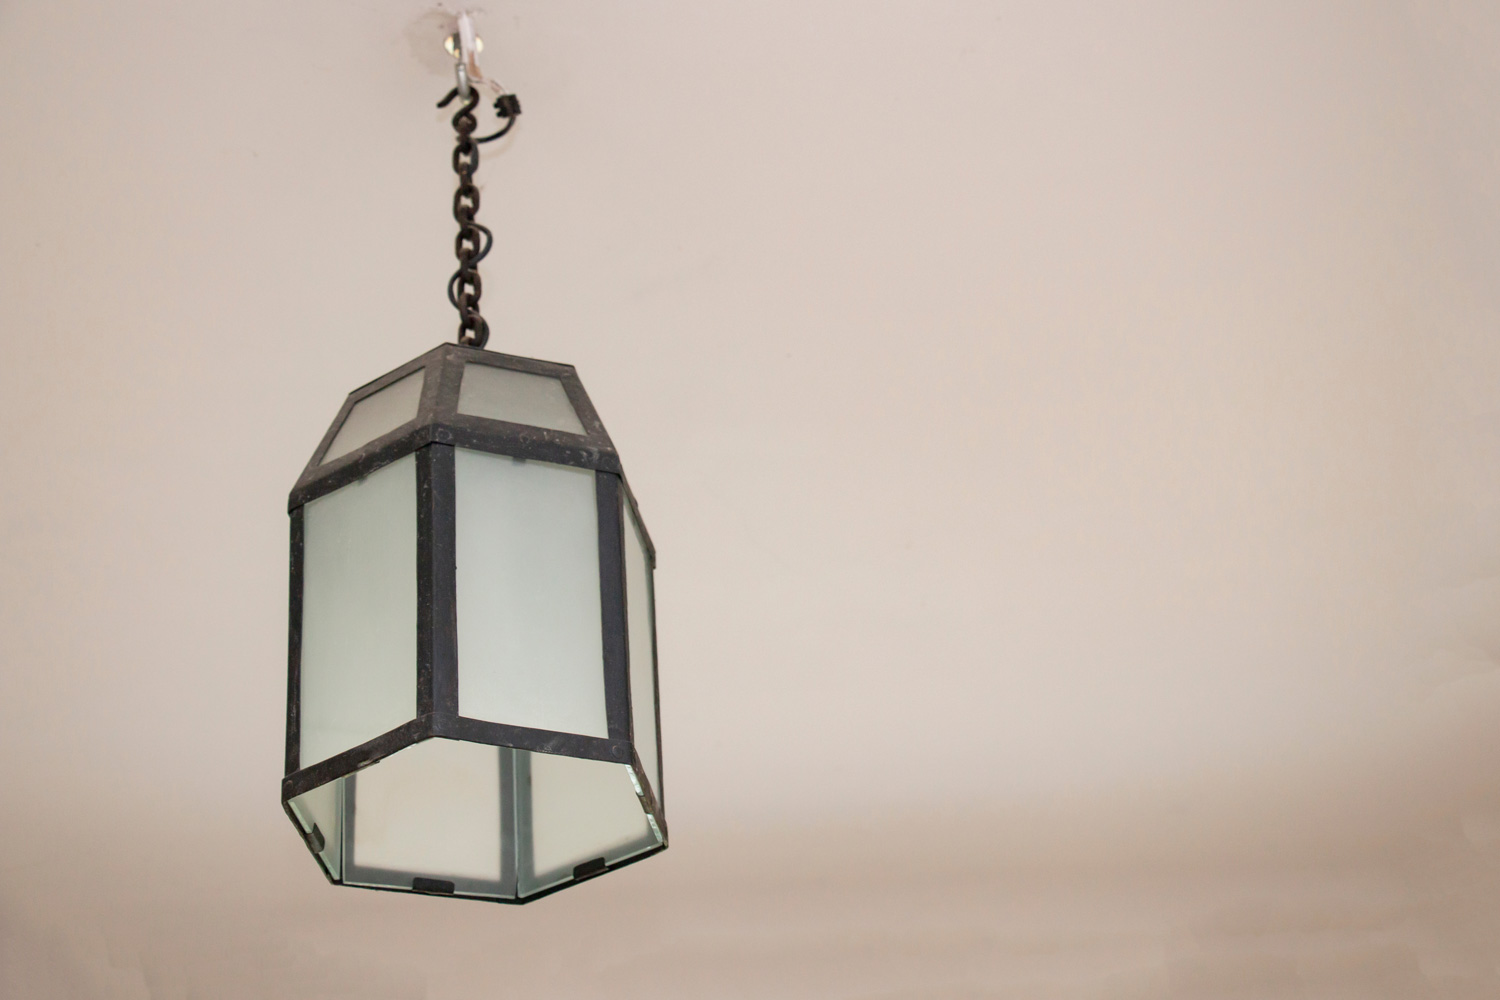 Pendant lamp in a black metal frame retro in a gray background